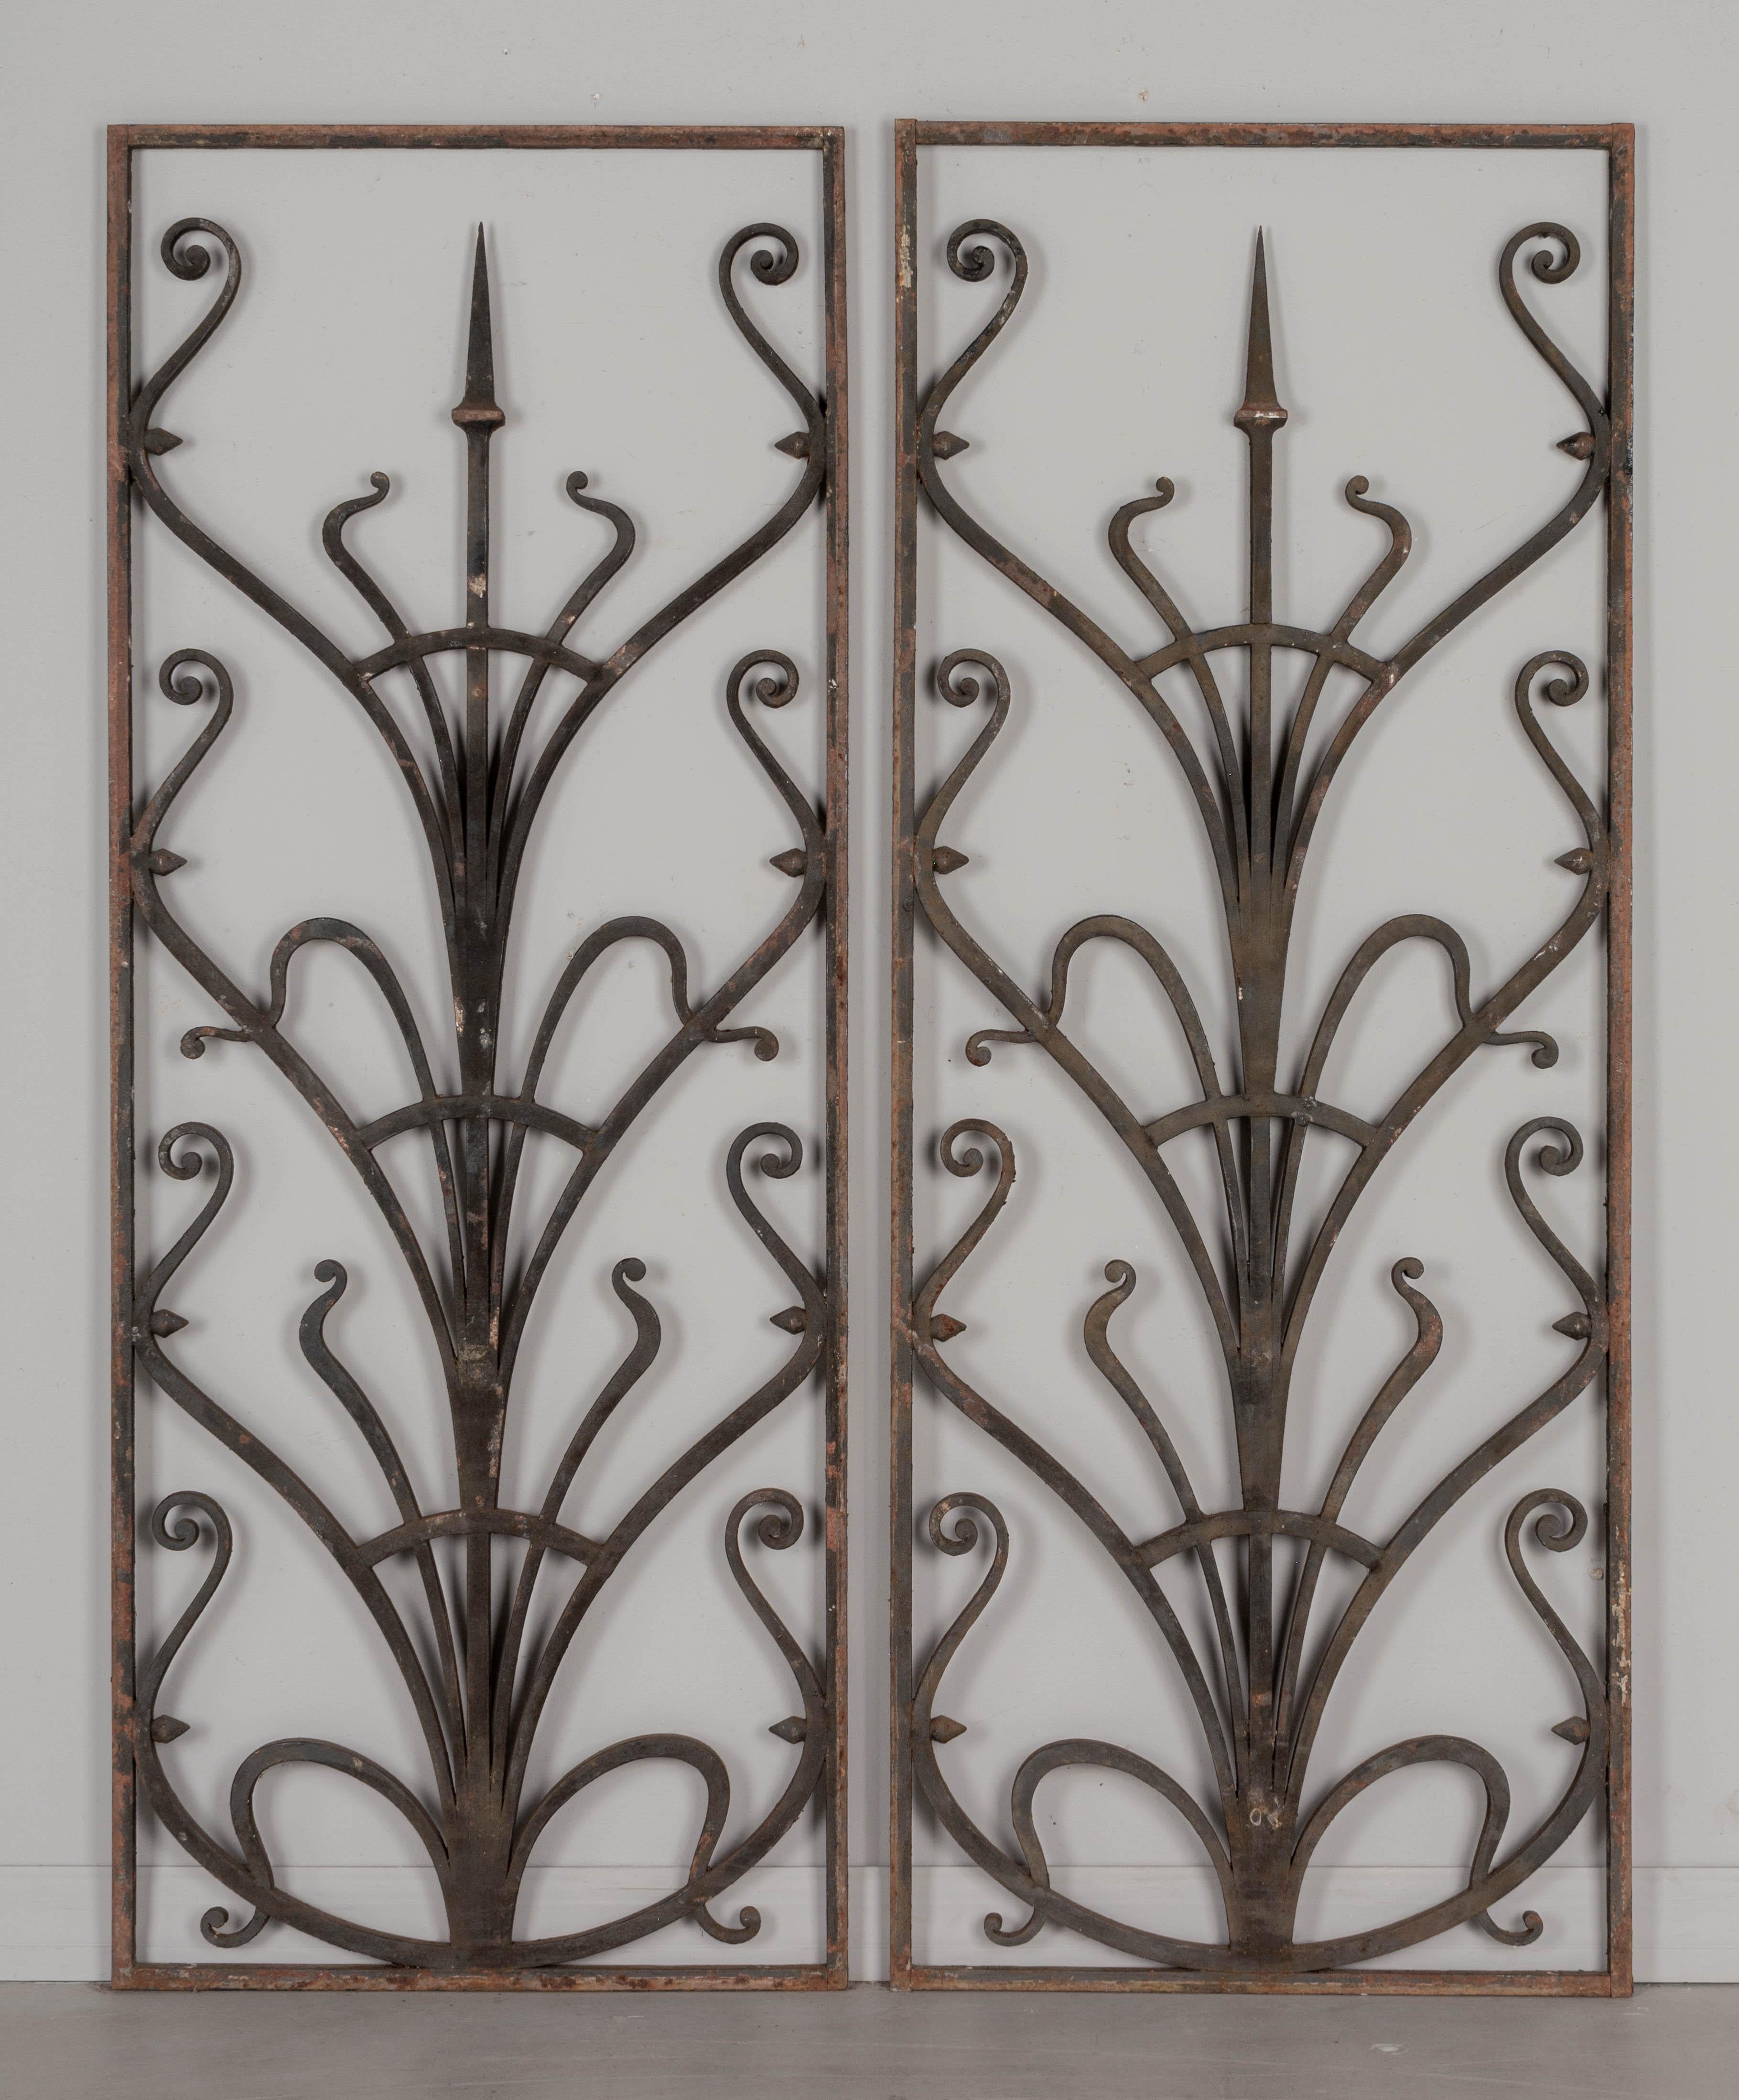 Hand-Crafted French Wrought Iron Garden Gate Grille Pair For Sale